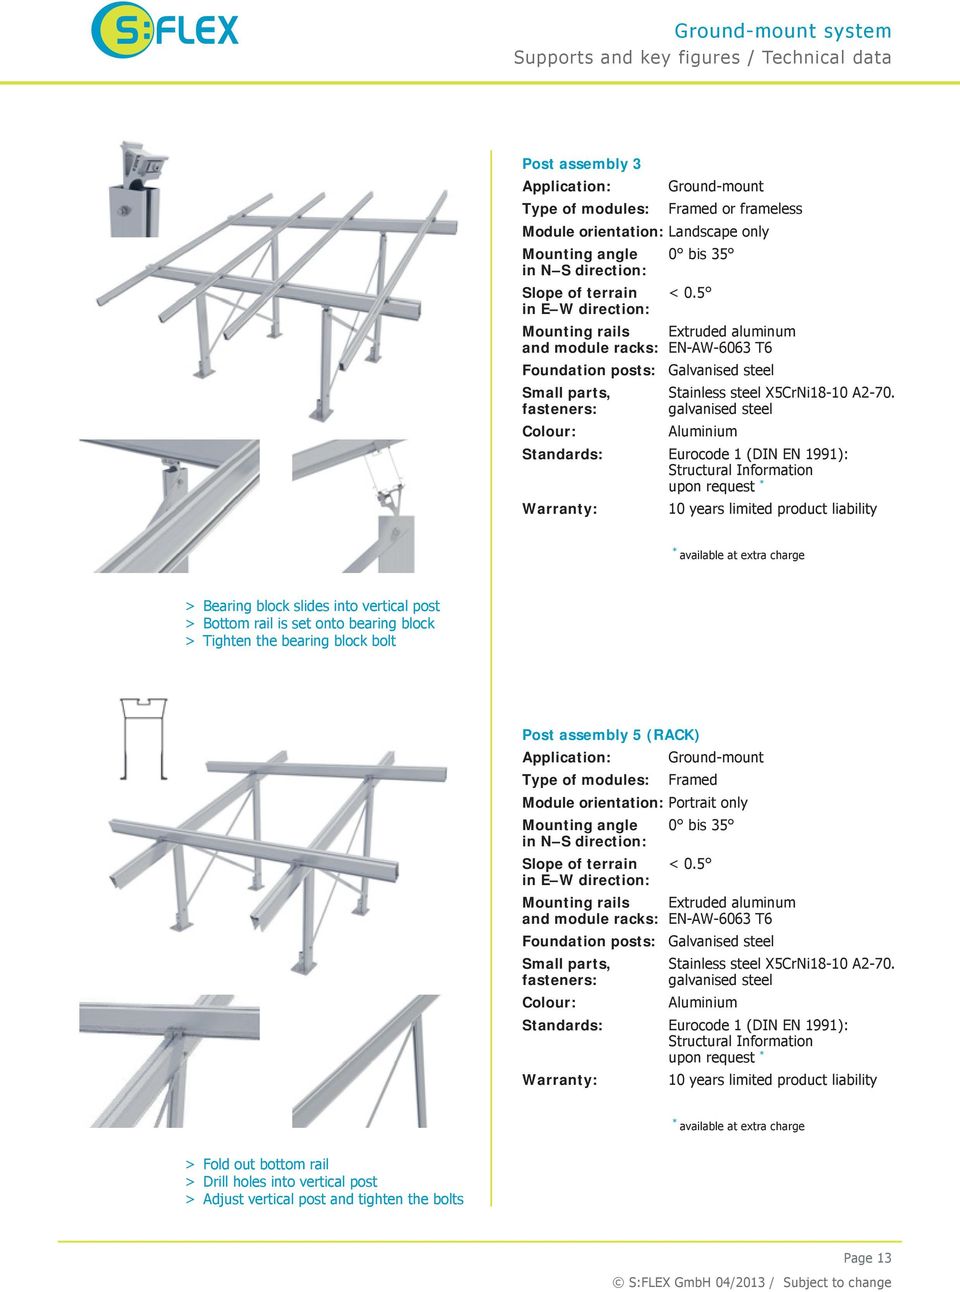 5 in E W direction: Mounting rails Extruded aluminum and module racks: EN-AW-6063 T6 Foundation posts: Galvanised steel Small parts, Stainless steel X5CrNi18-10 A2-70.